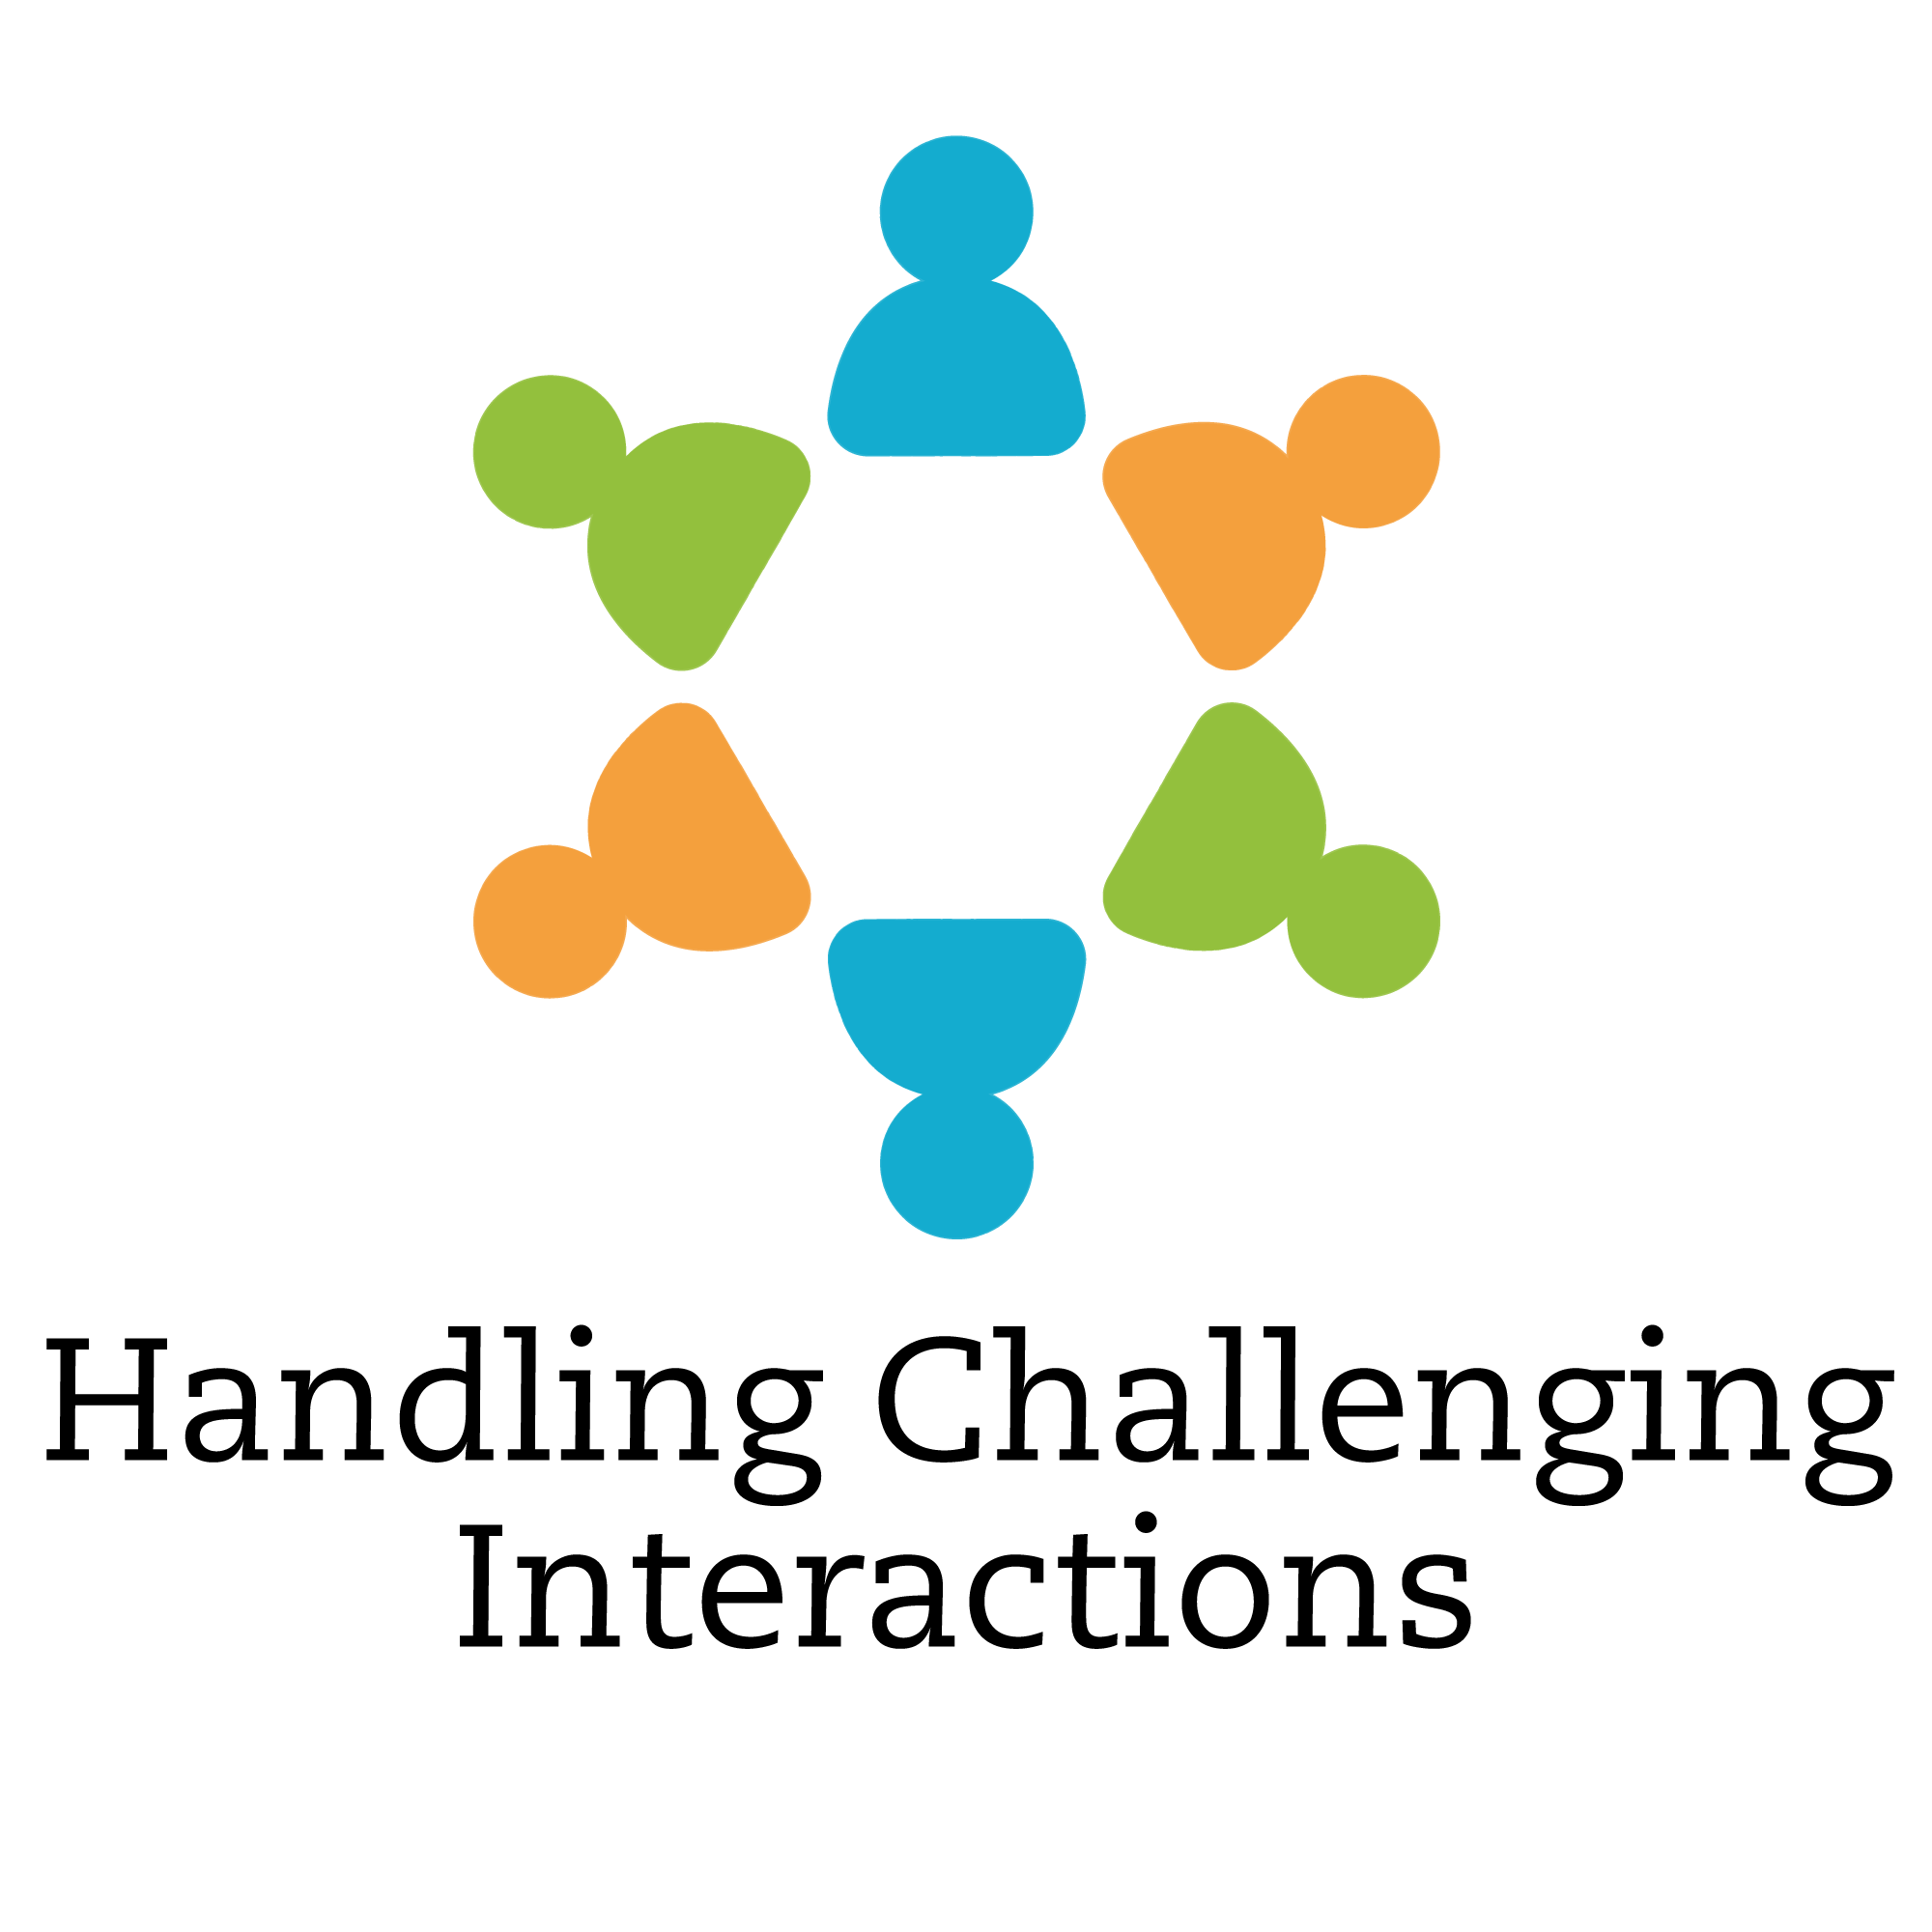 Handling challenging interactions with confidence (16 April)